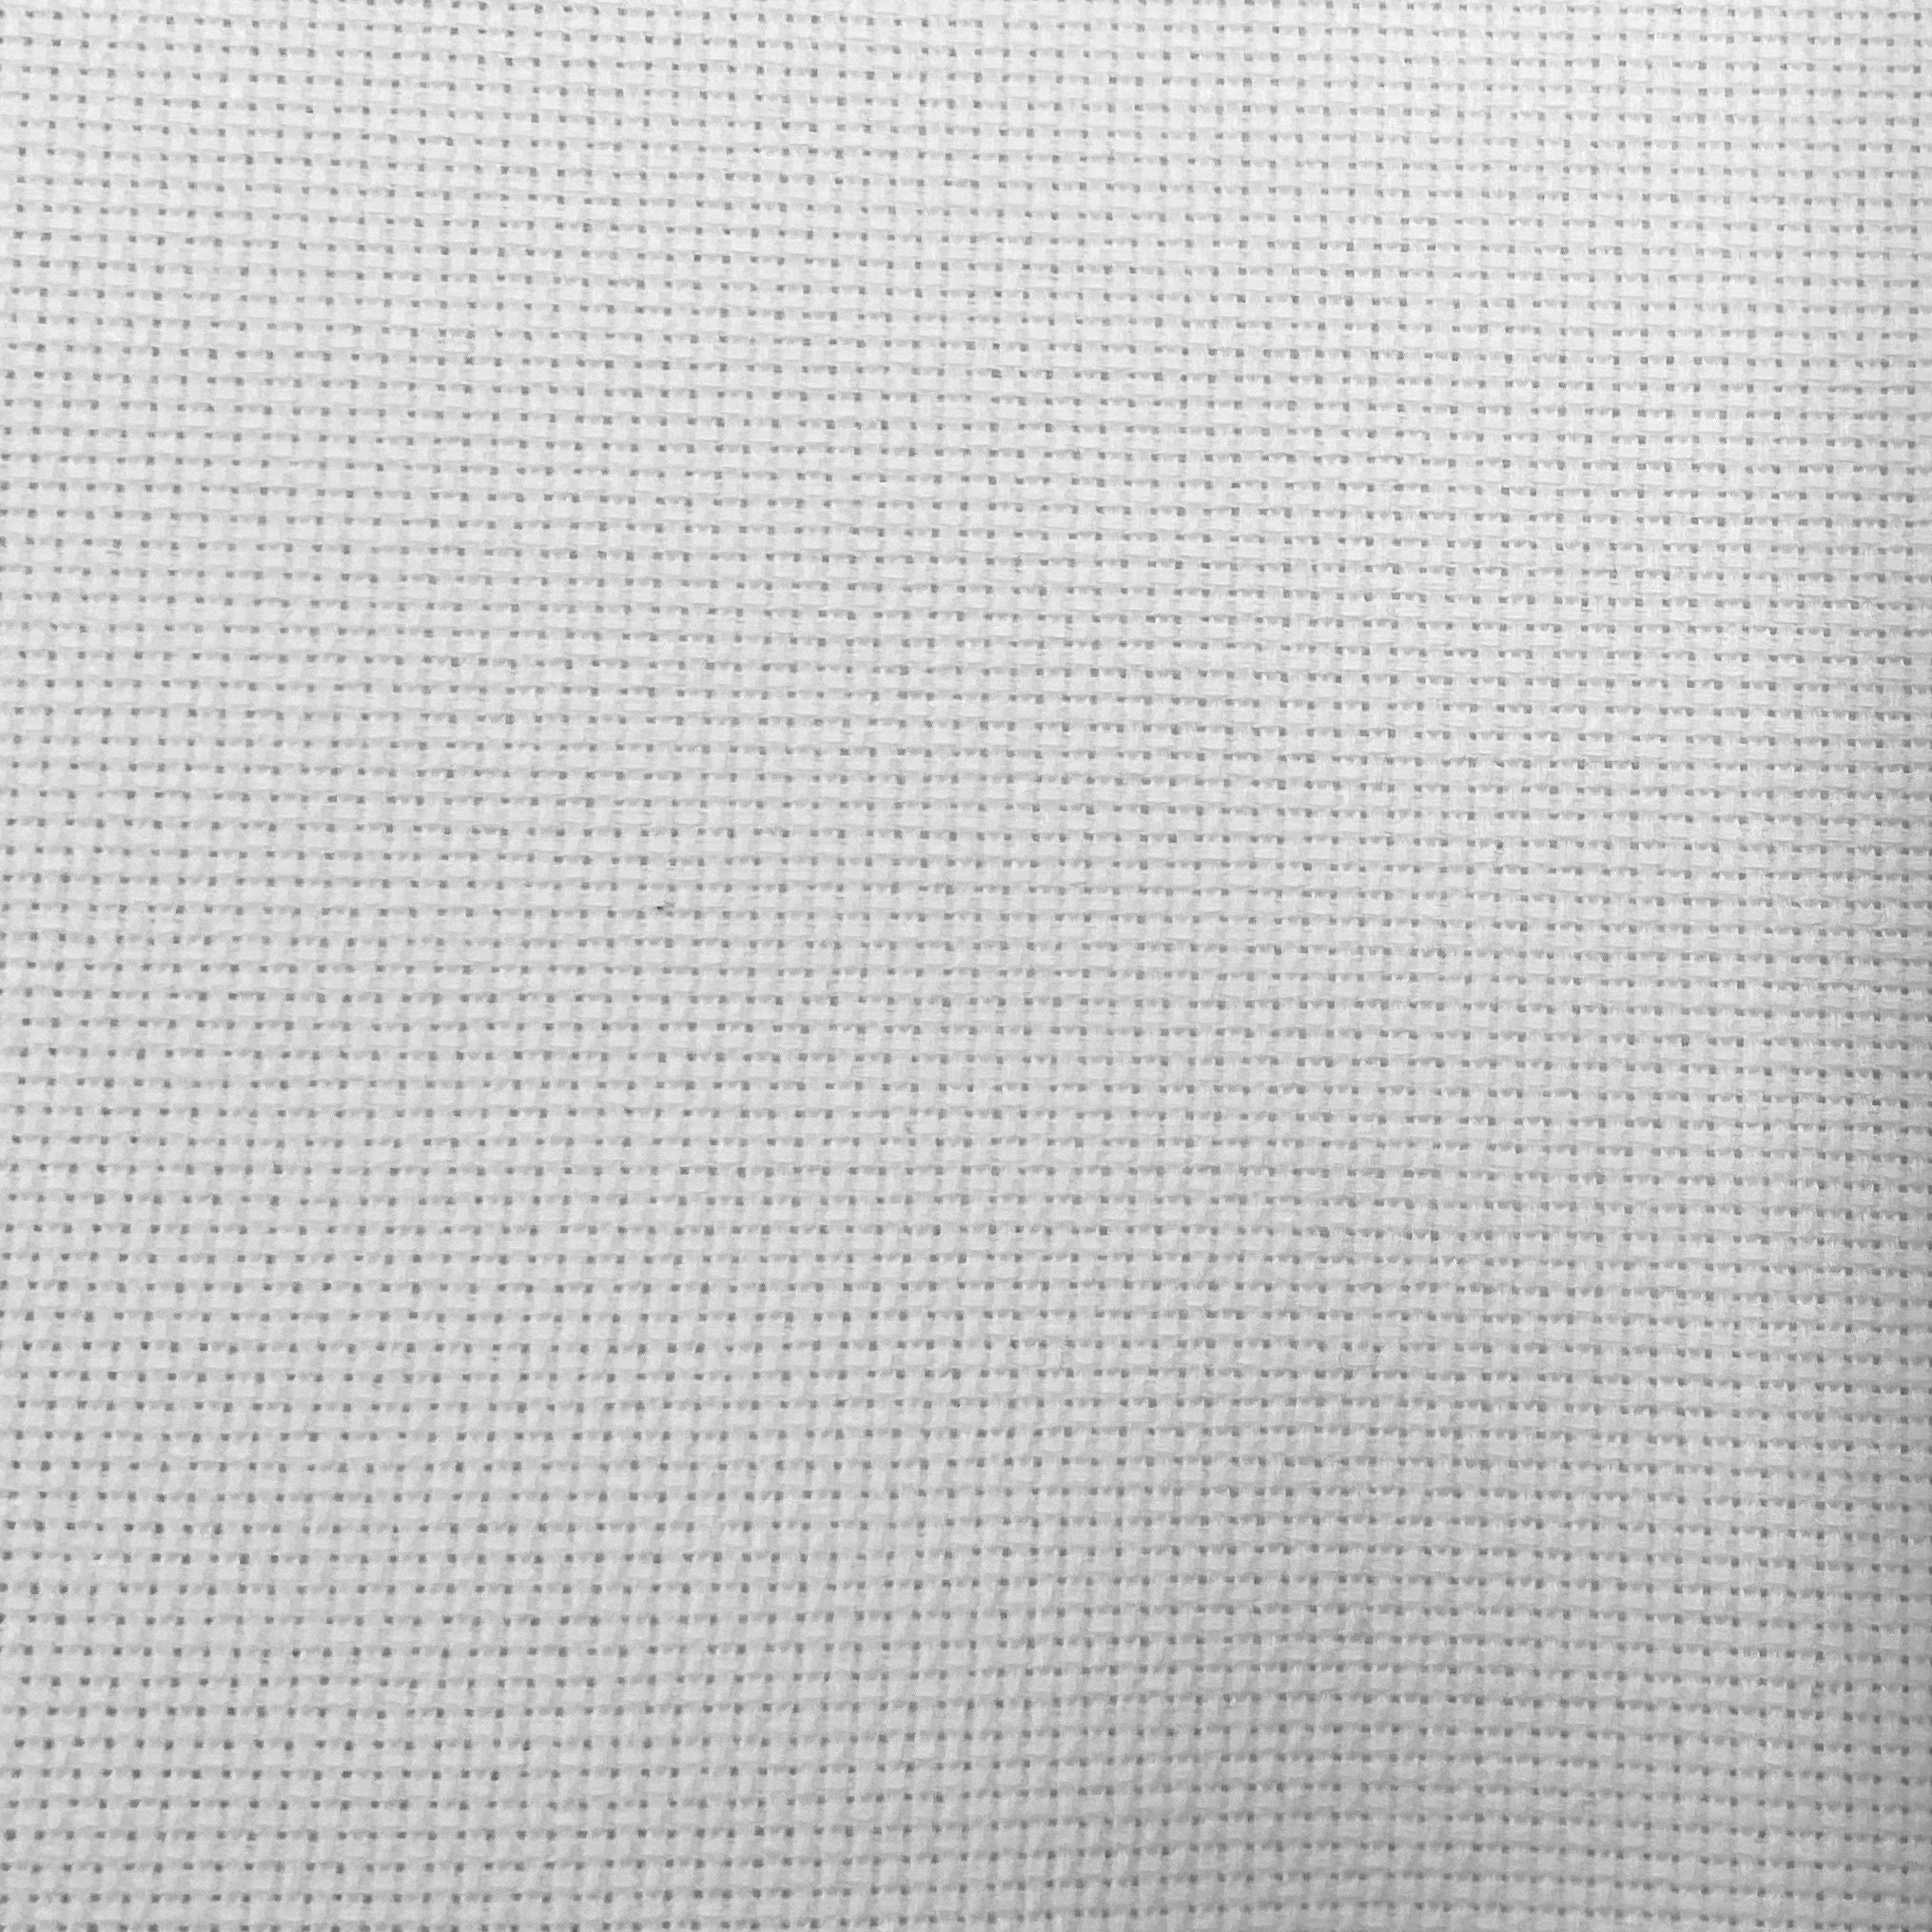 YOTINO 59 by 39 inch 18 Count White Cross Stitch Cloth Fabric Aida Cloth for Cross Stitch Projects